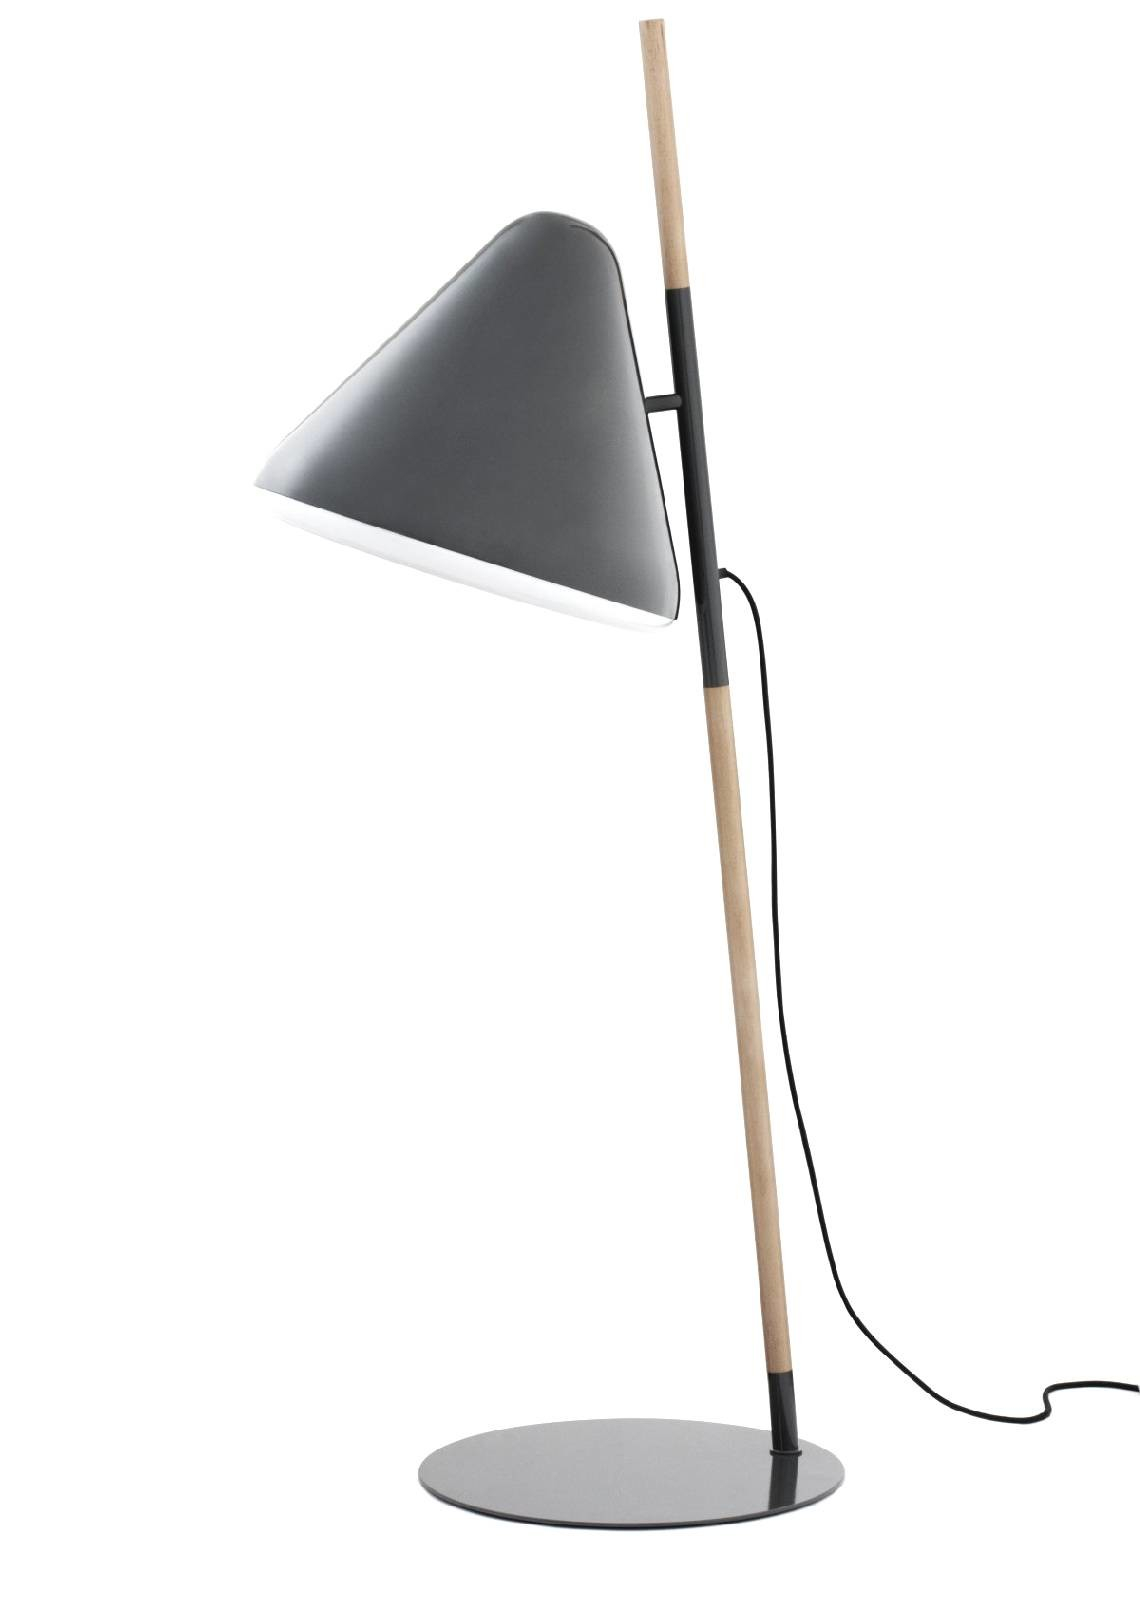 44 Inspirational Contemporary Floor Lamps That Are Simple with size 1140 X 1619